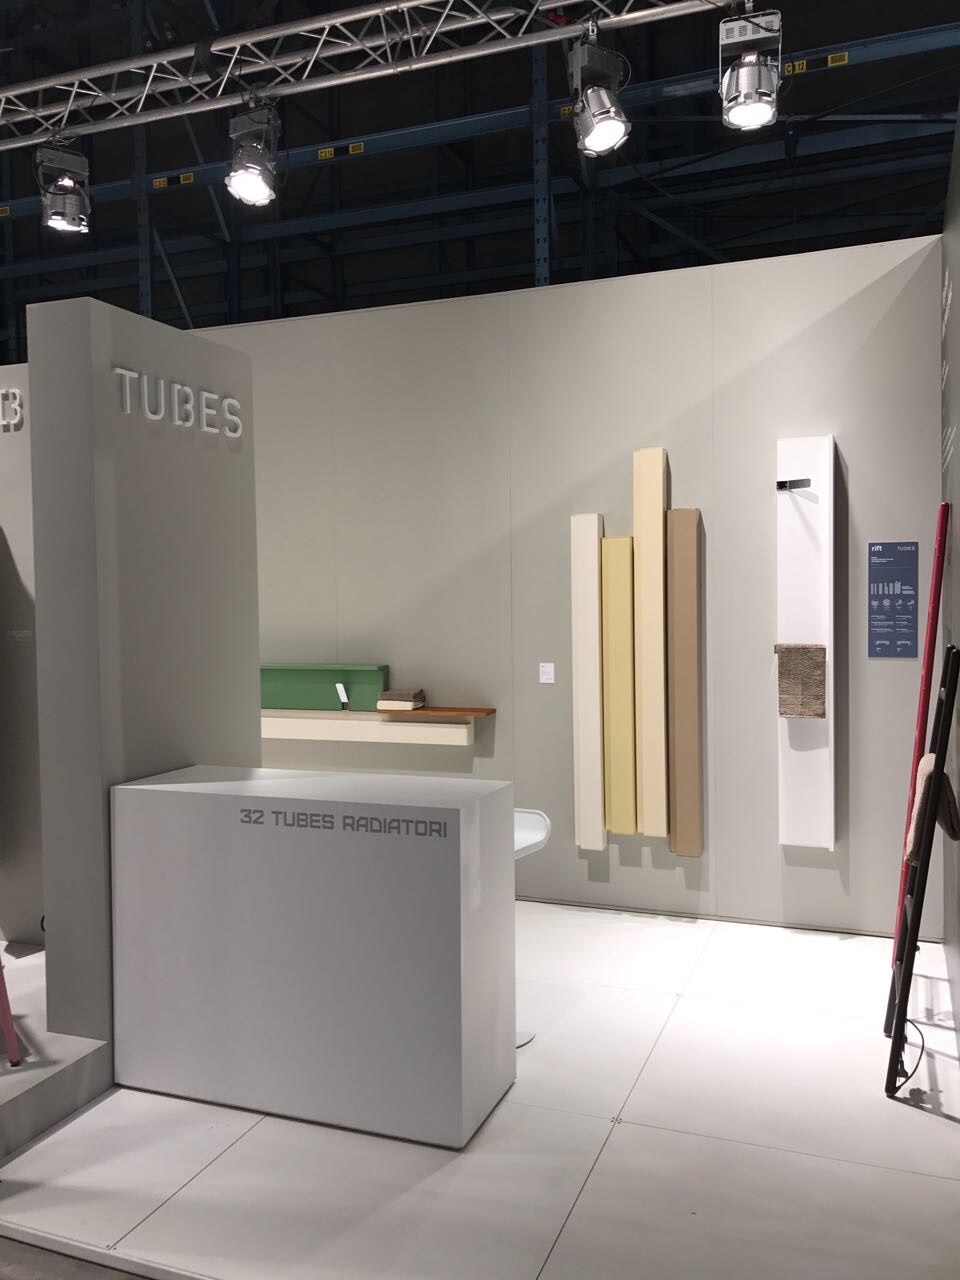 Tubes awarded at Design District 2017-IMG_4637